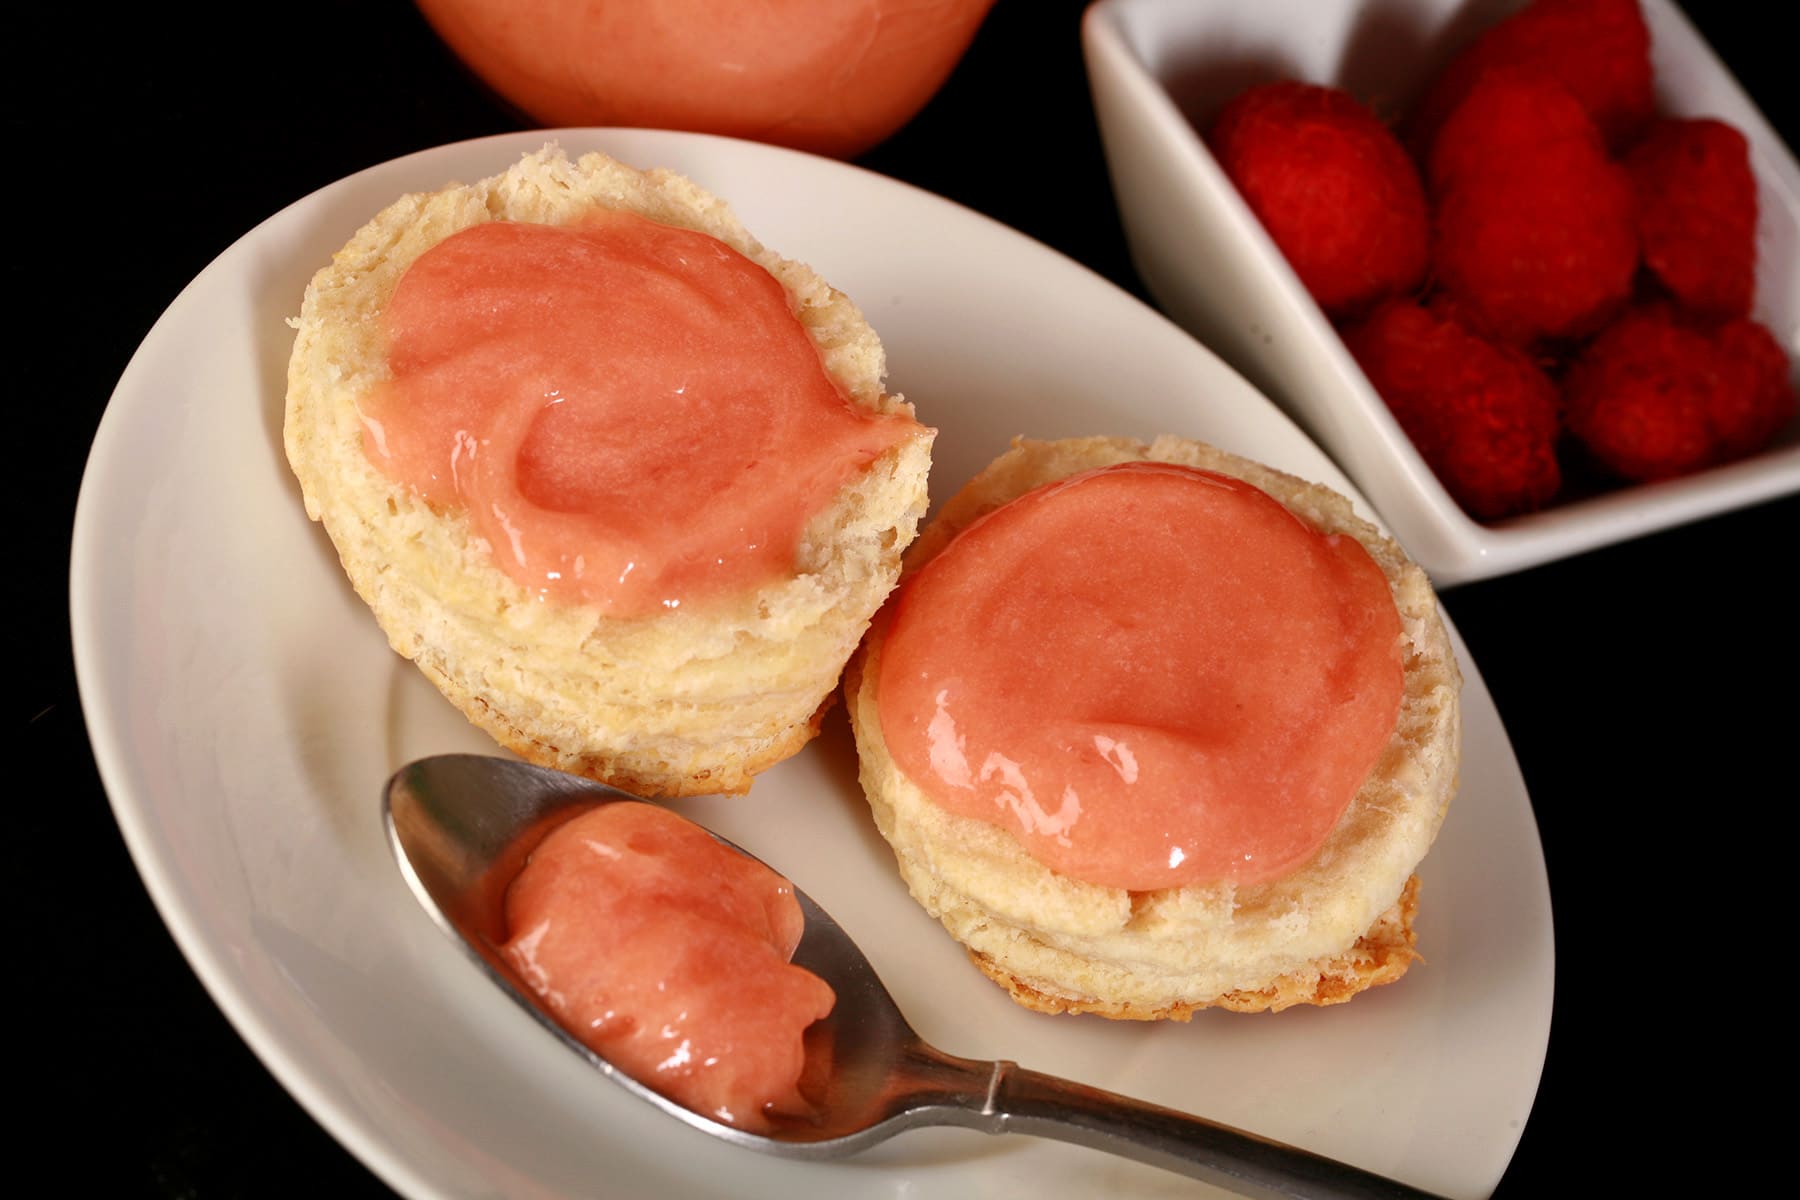 Two raspberry curd covered biscuits on a plate, along with a spoon of the pink curd.